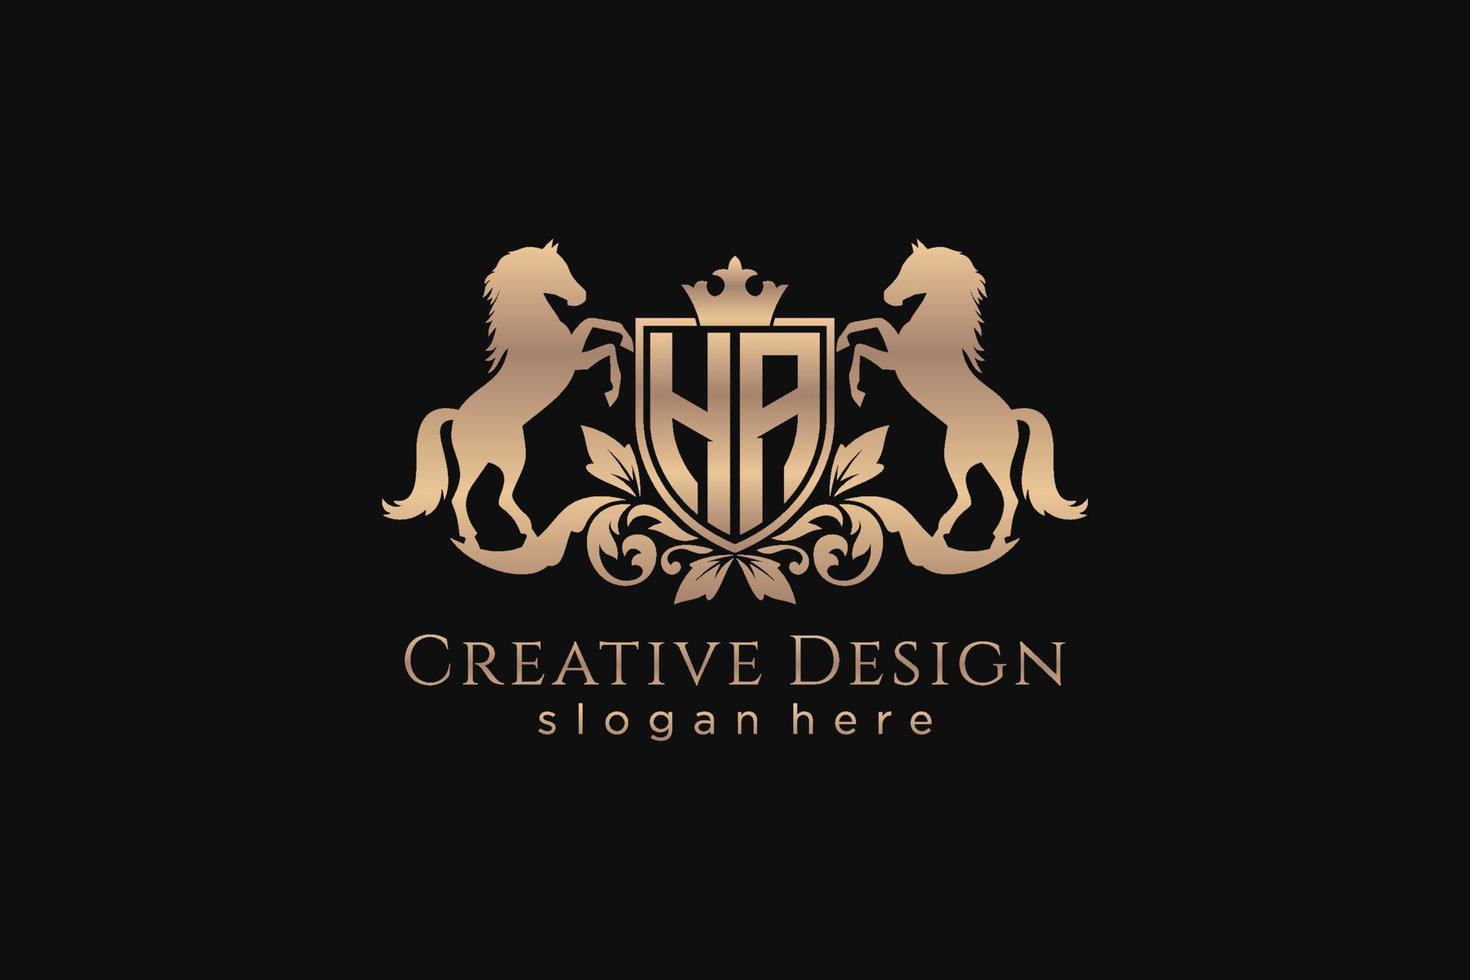 initial HA Retro golden crest with shield and two horses, badge template with scrolls and royal crown - perfect for luxurious branding projects vector